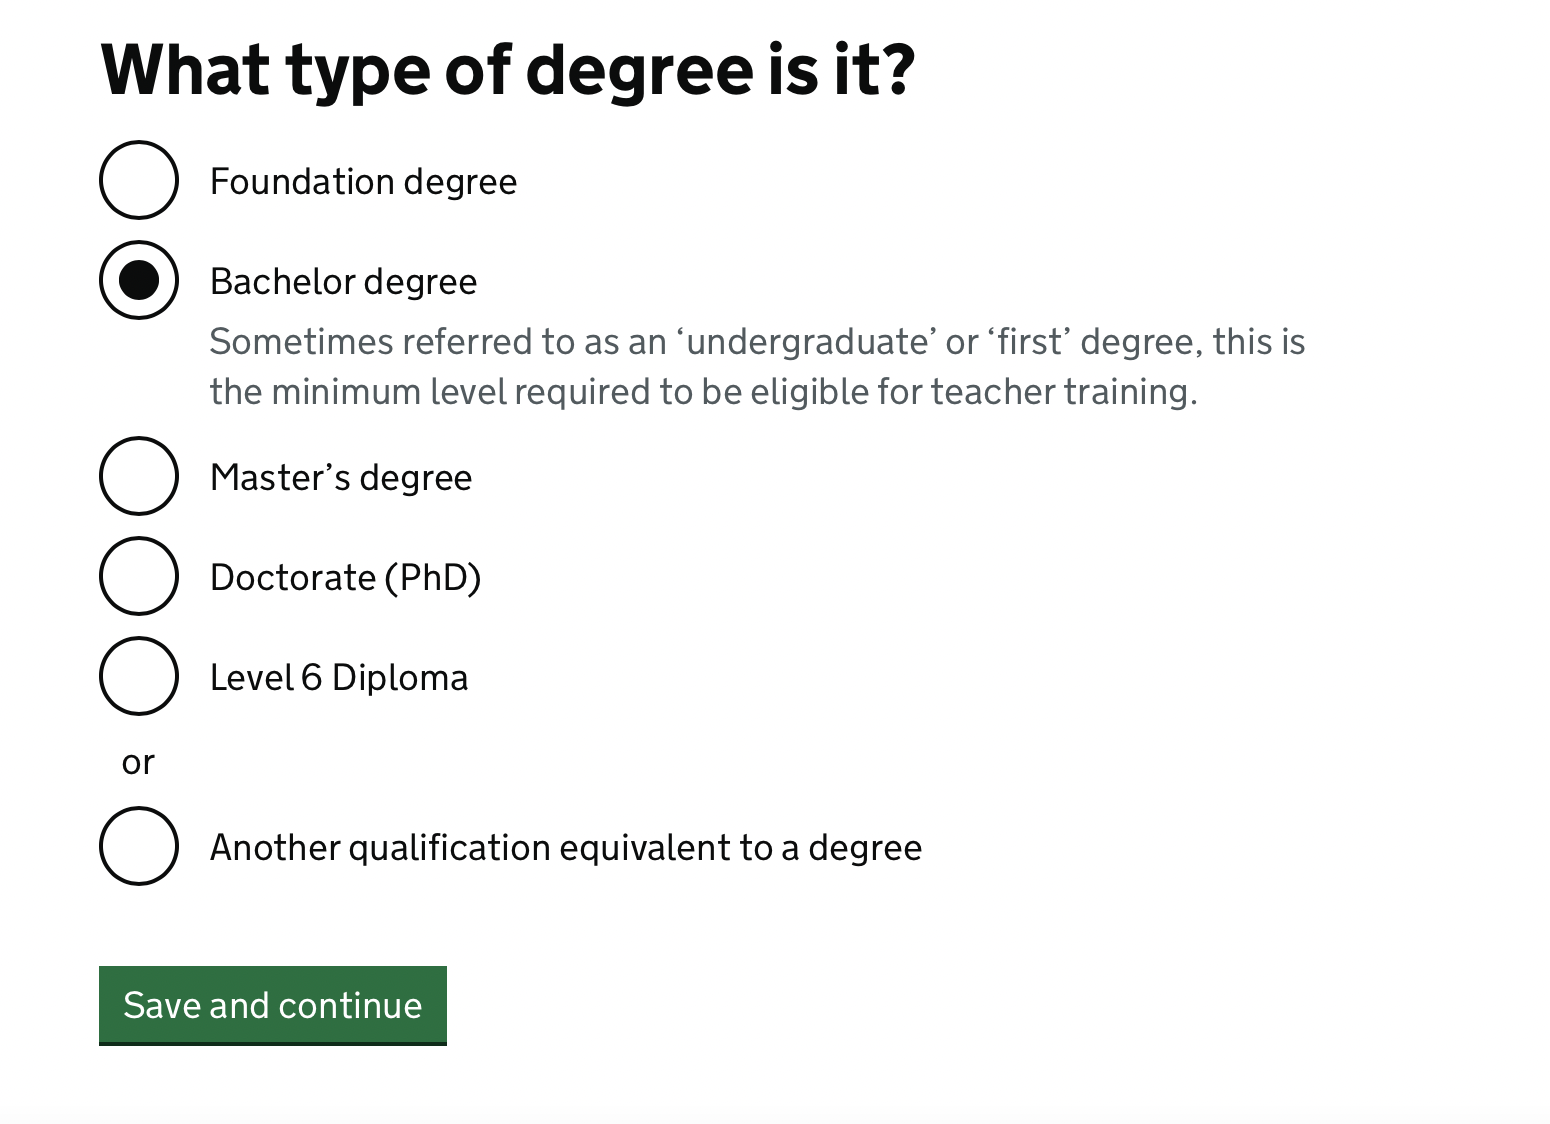 Screenshot showing question ‘What type of degree is it?’ with radio button options for Foundation, Bachelor, Master’s, Doctorate (PhD), Level 6 Diploma or Another qualification equivalent to a degree